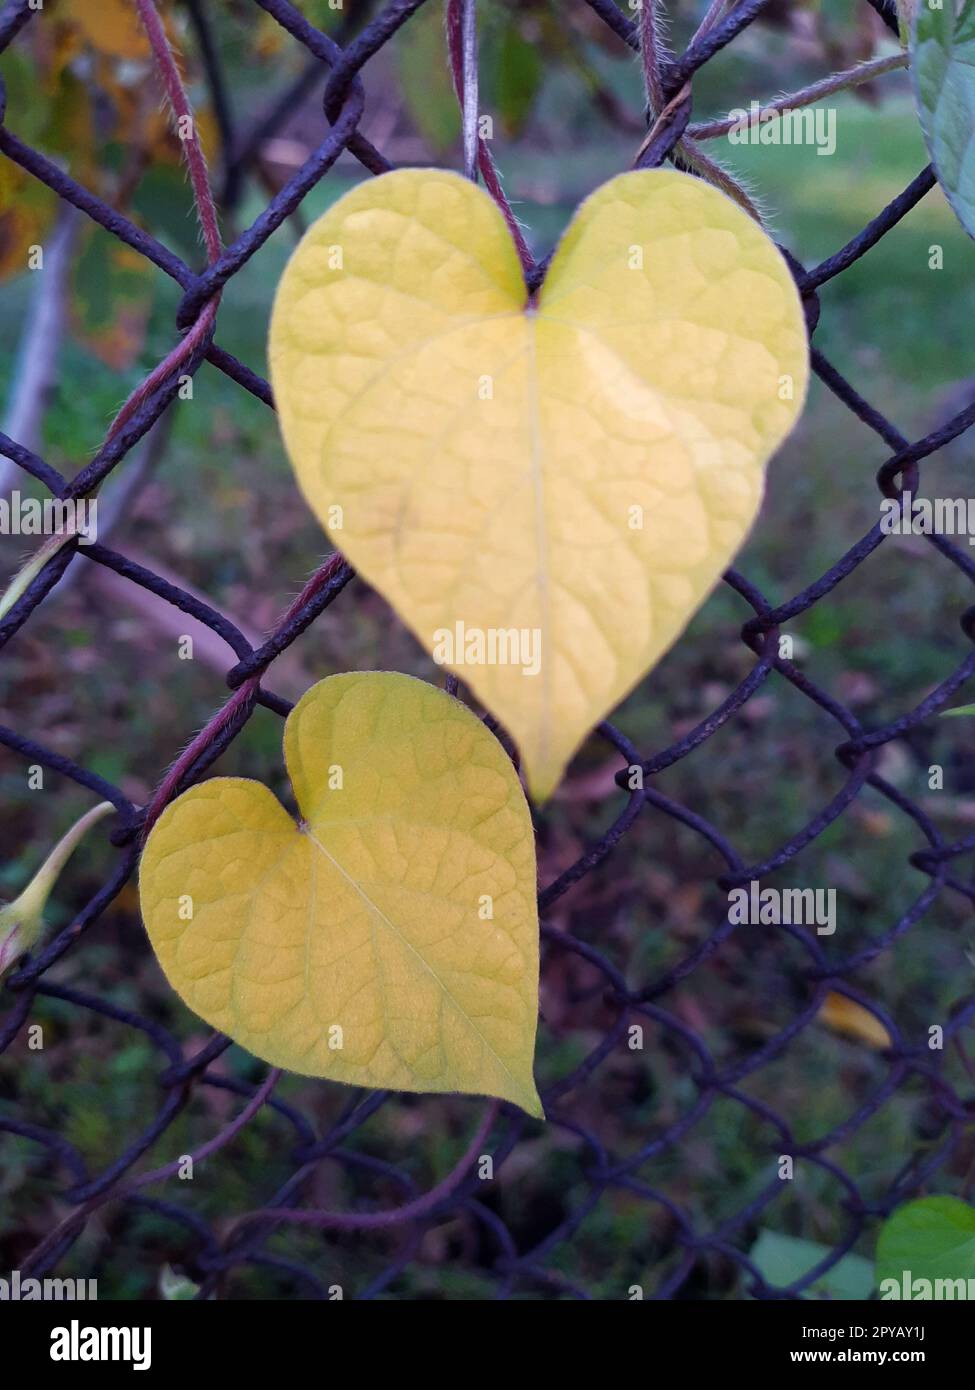 Leaves in the form of a heart on a metal grid close-up Stock Photo